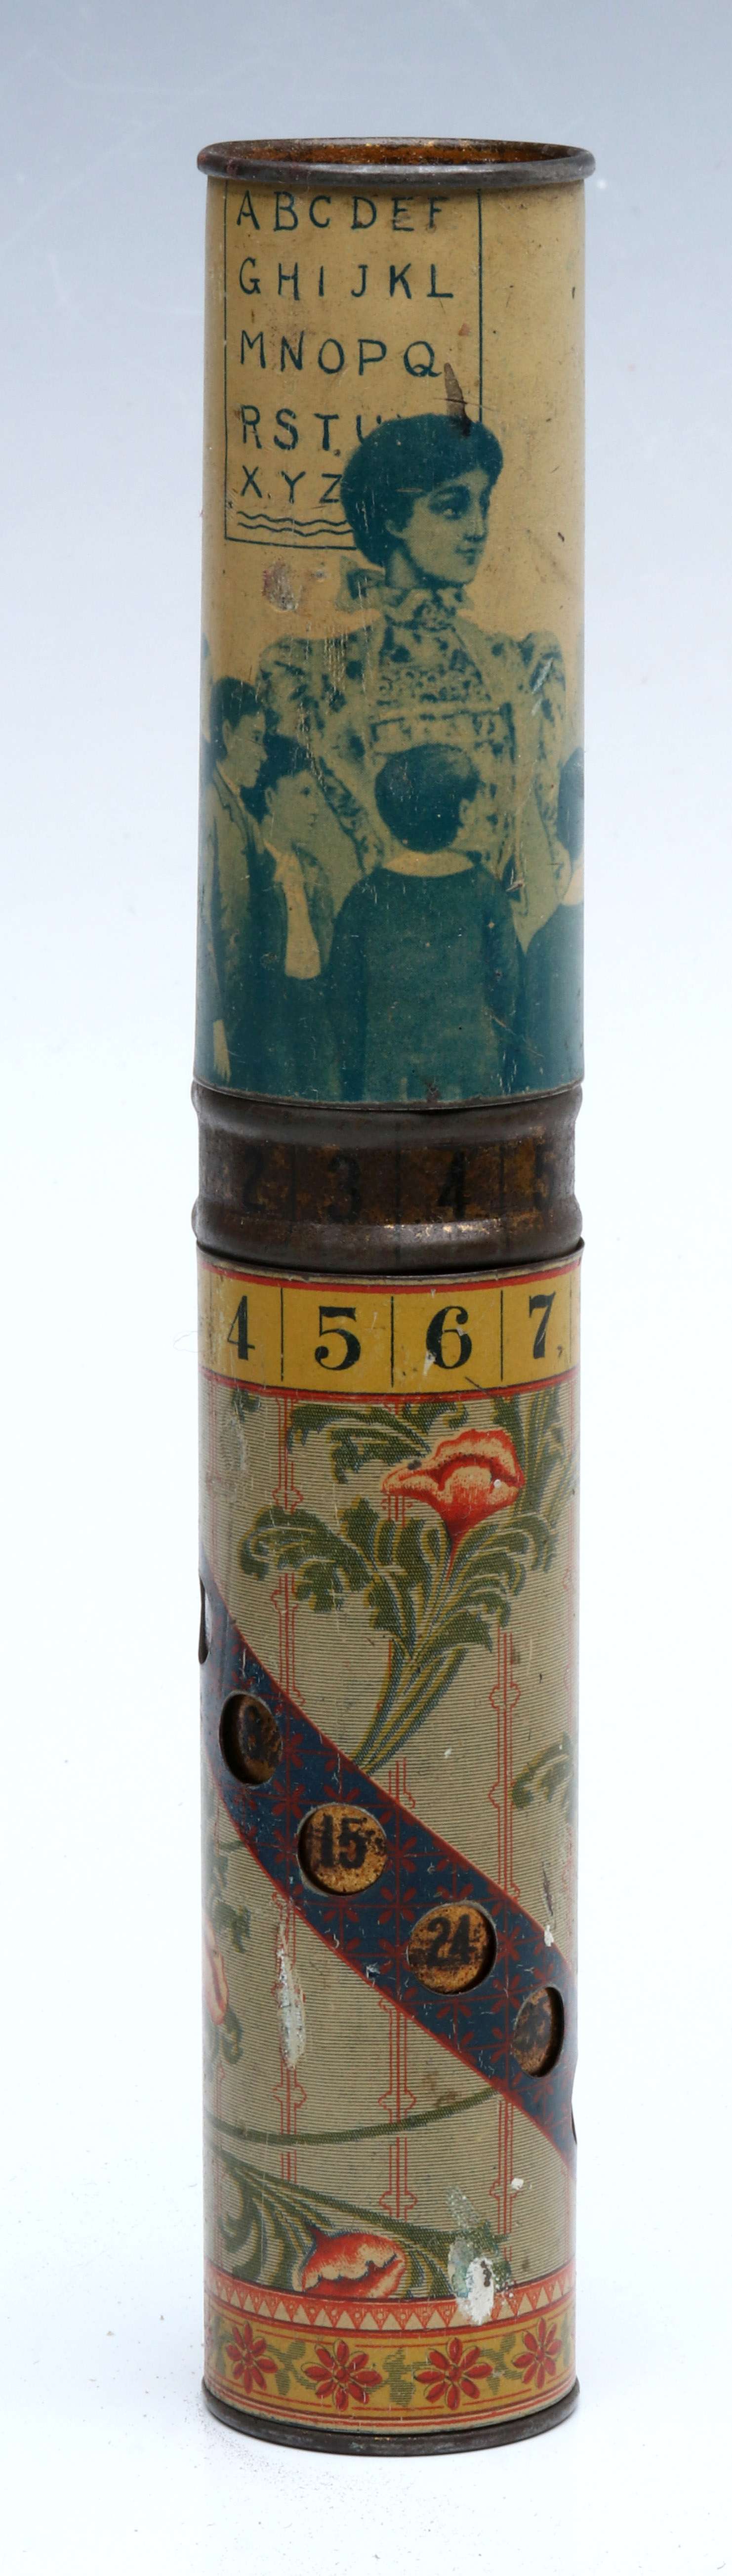 A LARGE 1898 TIN LITHO PENCIL BOX WITH CALCULATOR